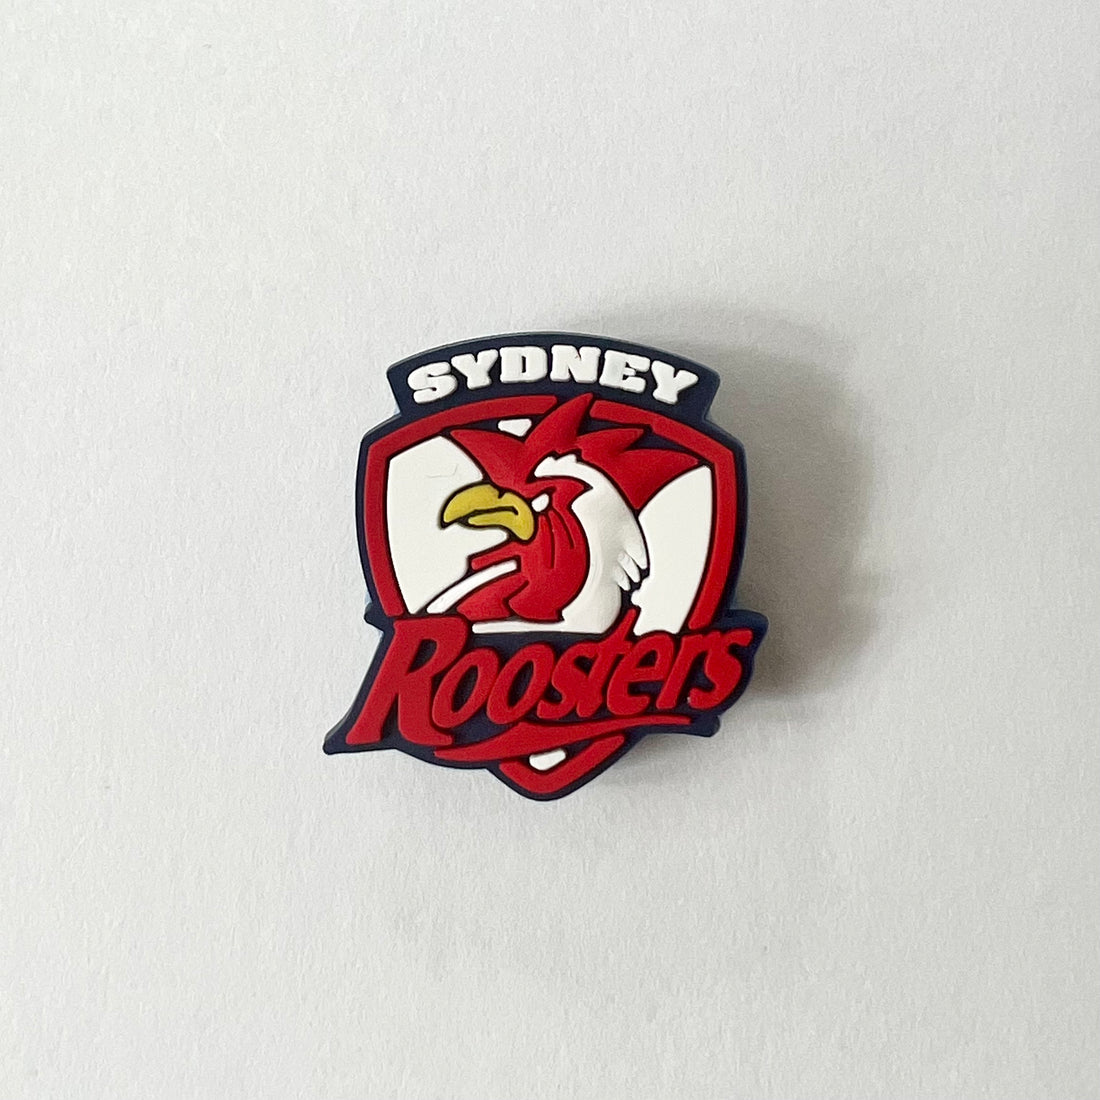 Sydney Roosters Charm